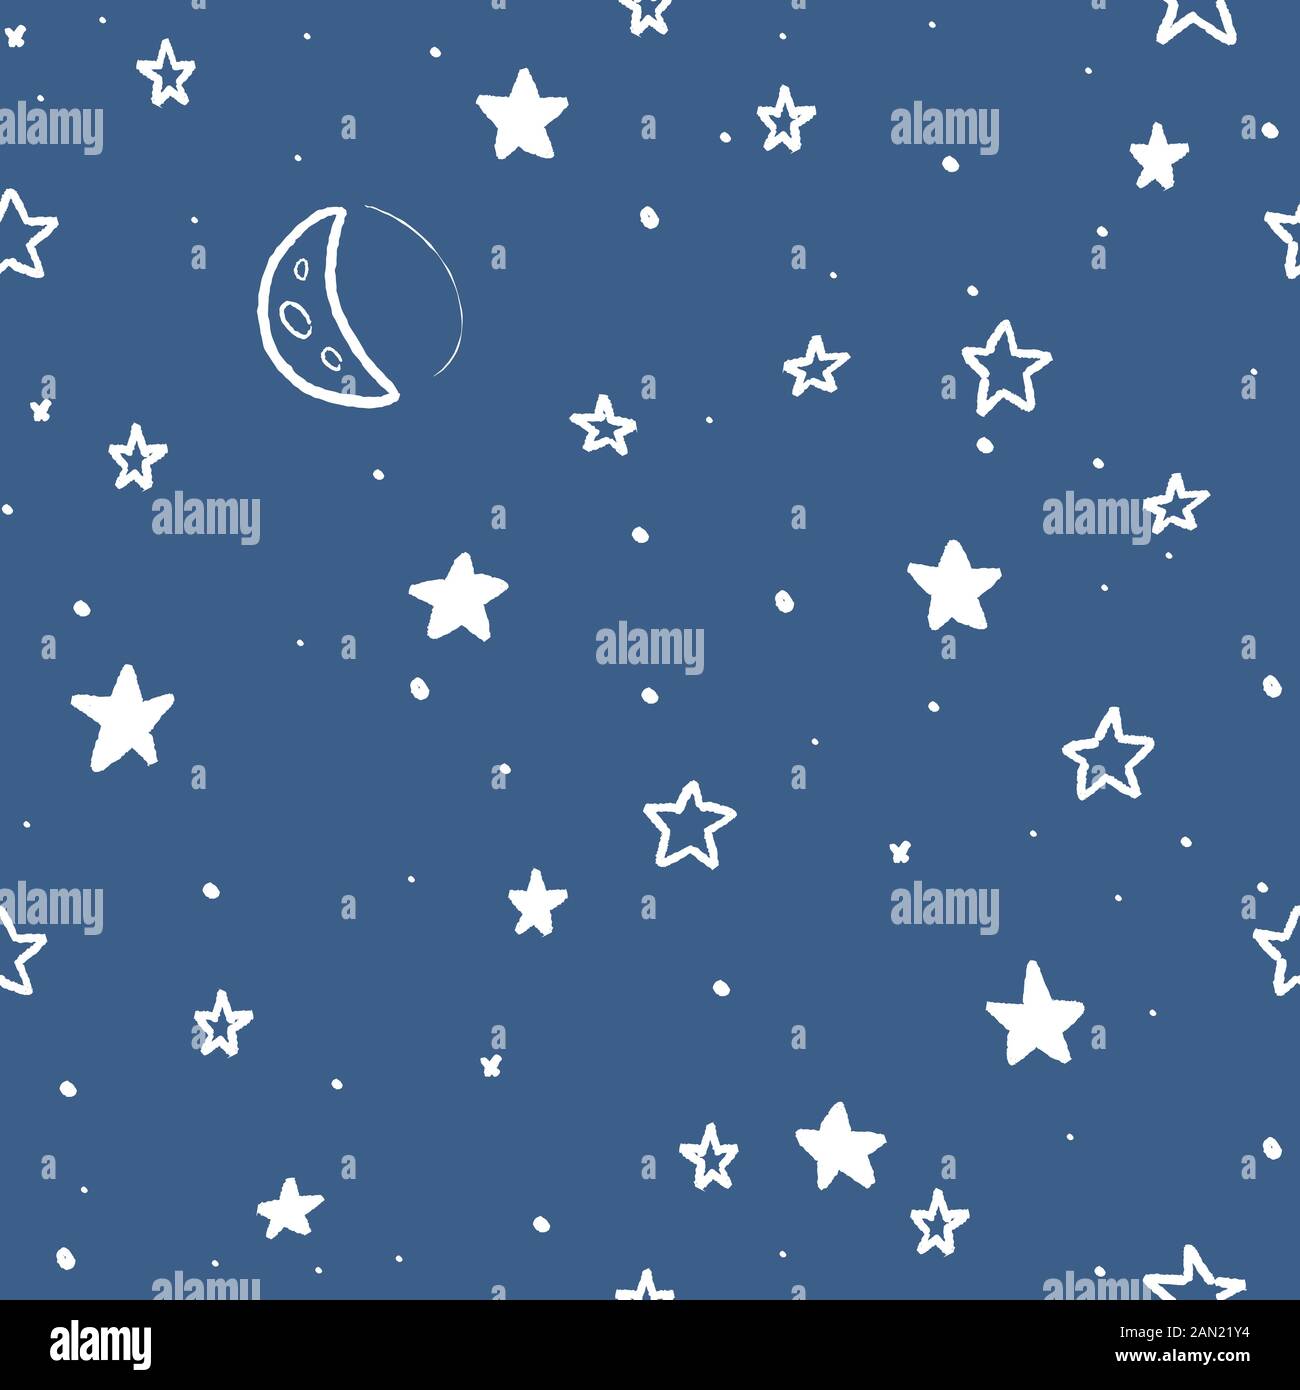 Stars and moon pattern - seamless doodle illustration vector. Stock Vector